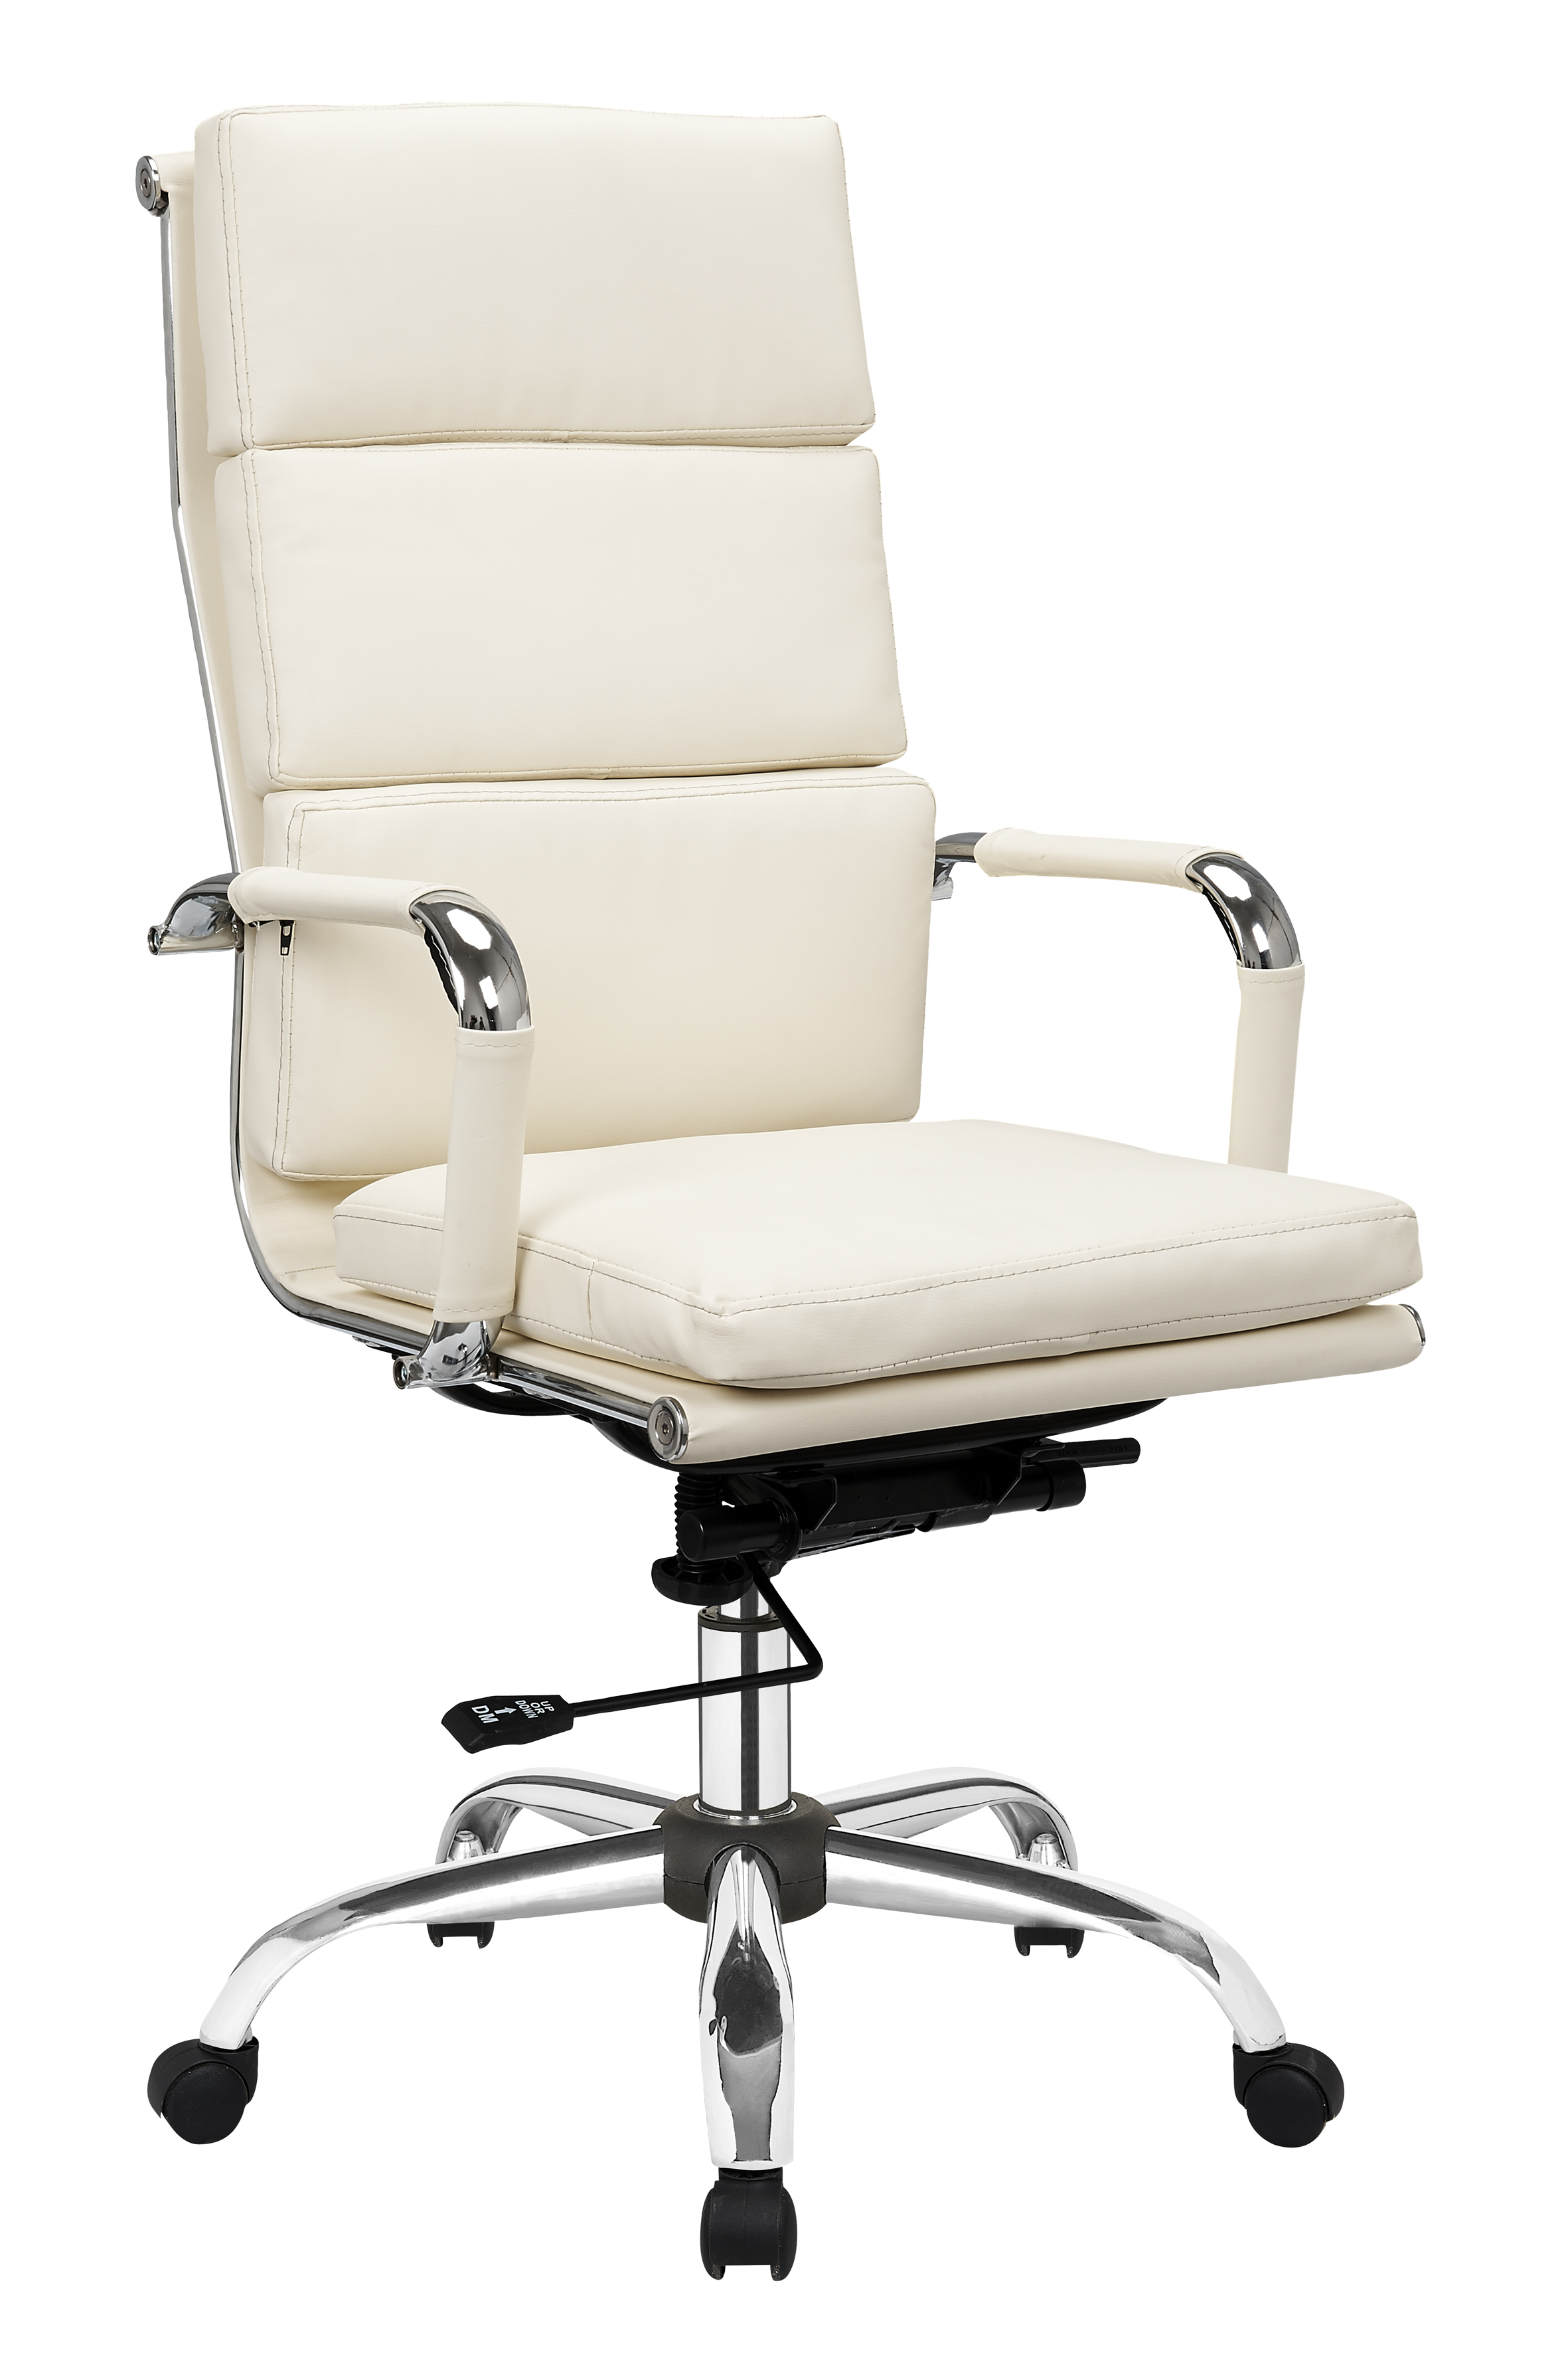 Premium Quality Cream Leather Office Manager Gas Lift Chair Chrome Base ...